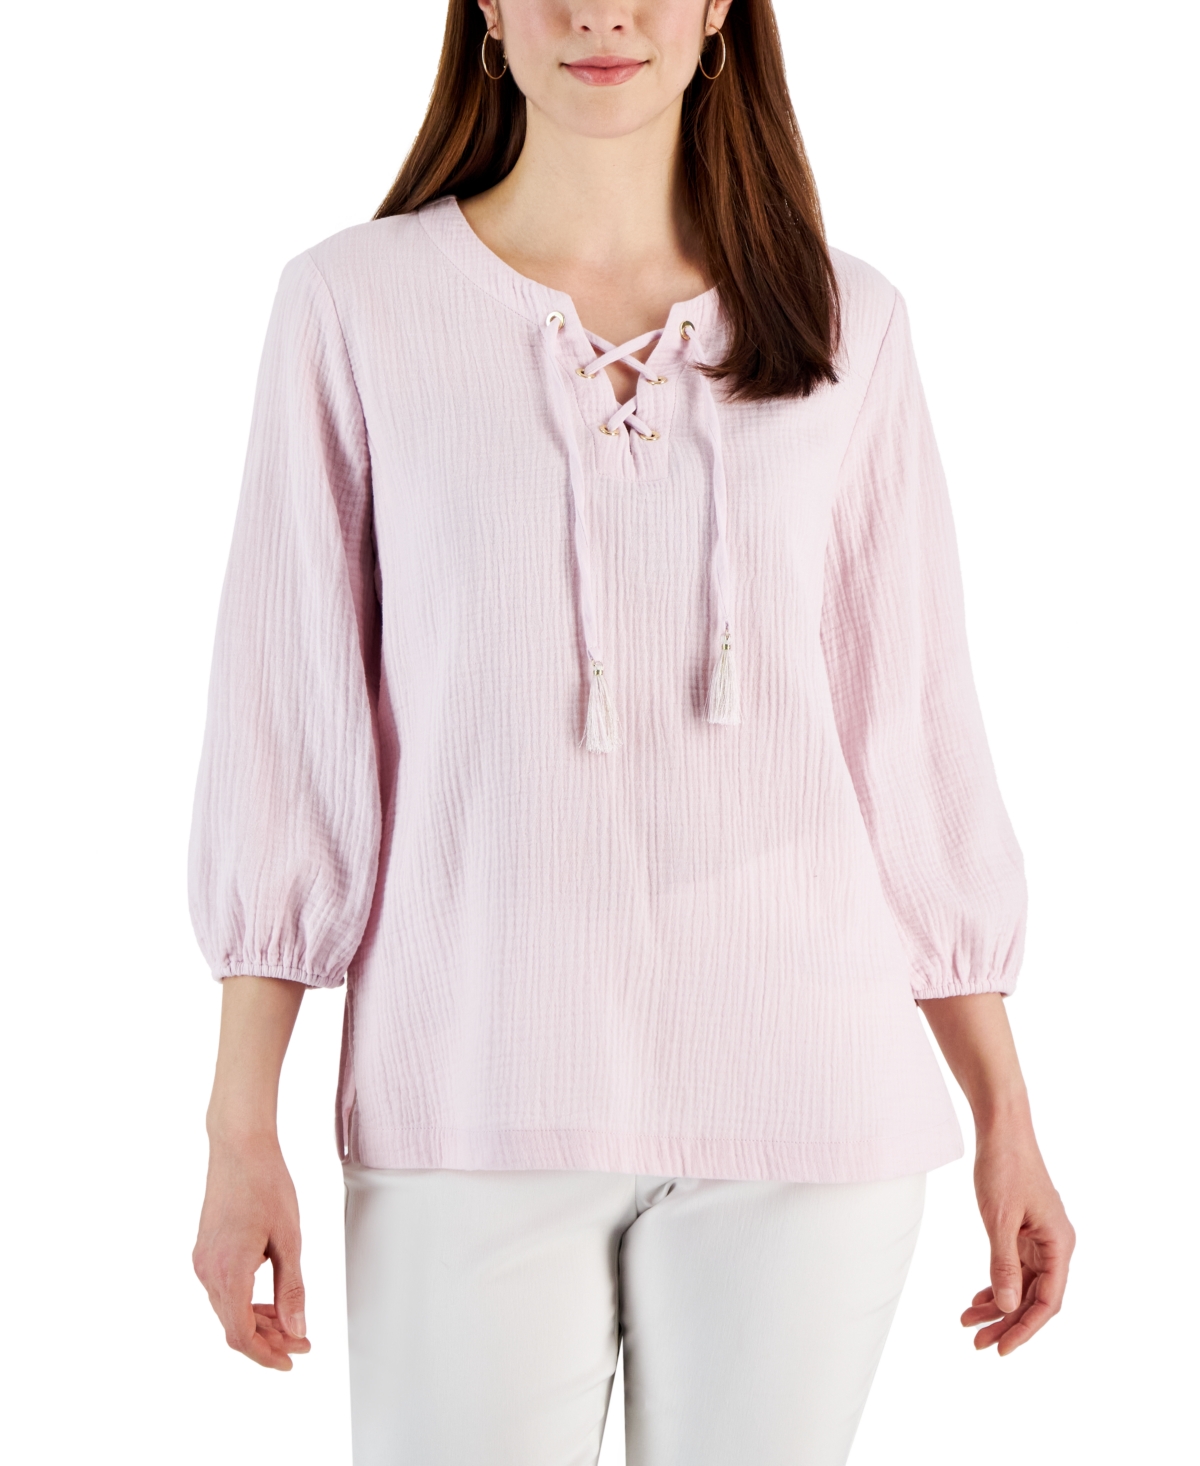 Women's Cotton Gauze Tasseled Lace-Up Top, Created for Macy's - Lilac Sky